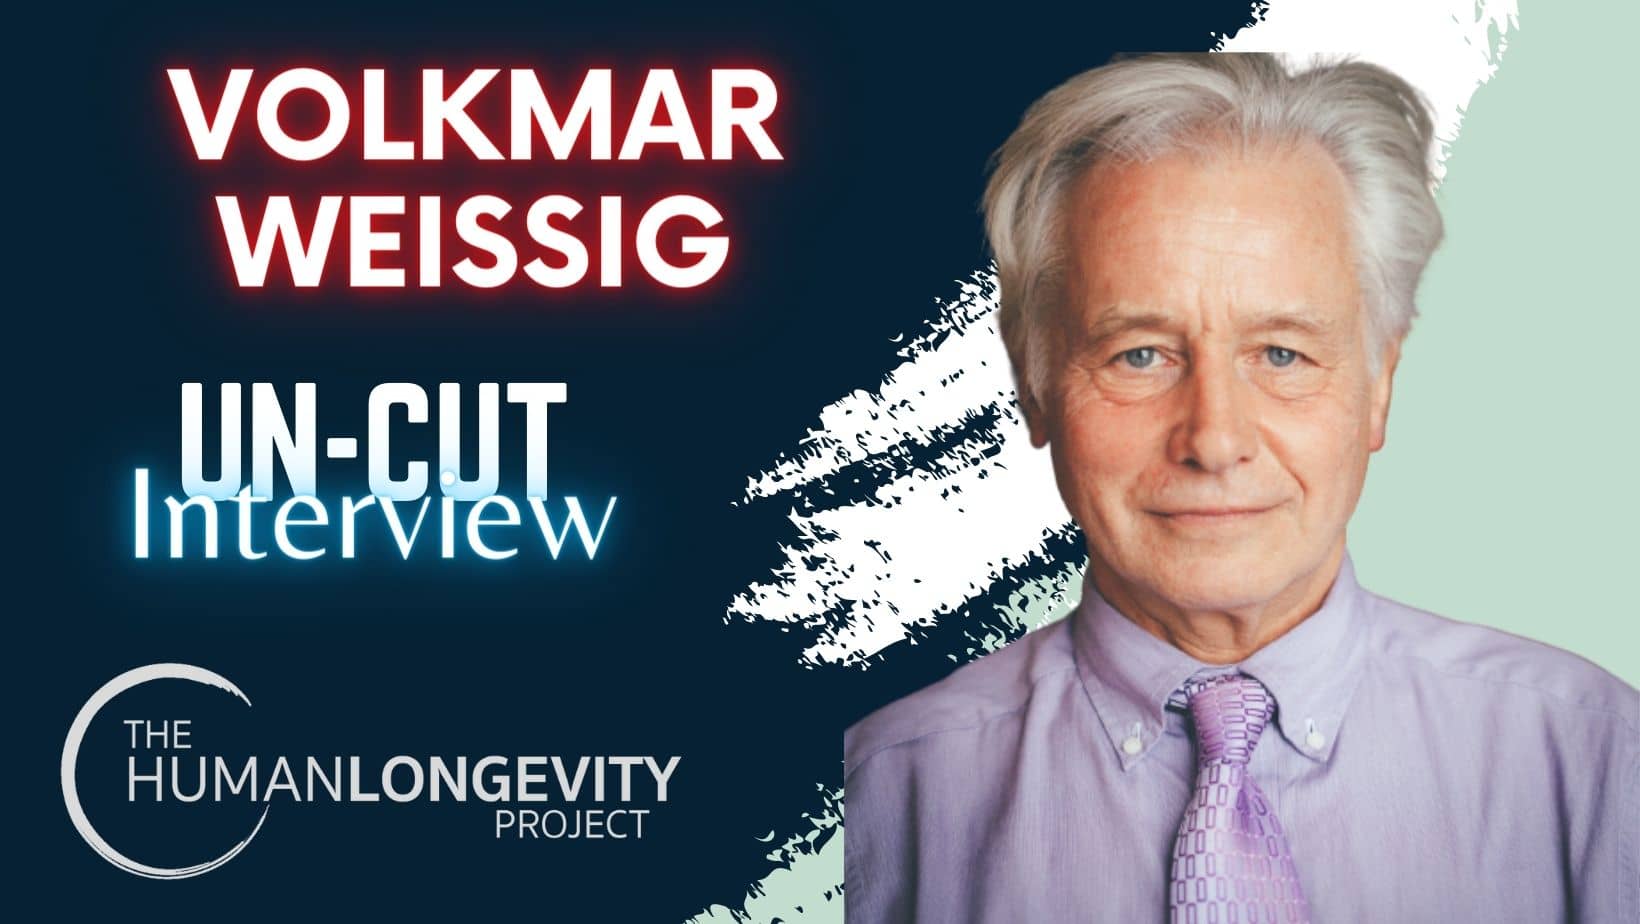 Human Longevity Project Uncut Interview With Dr. Volkmar Weissig